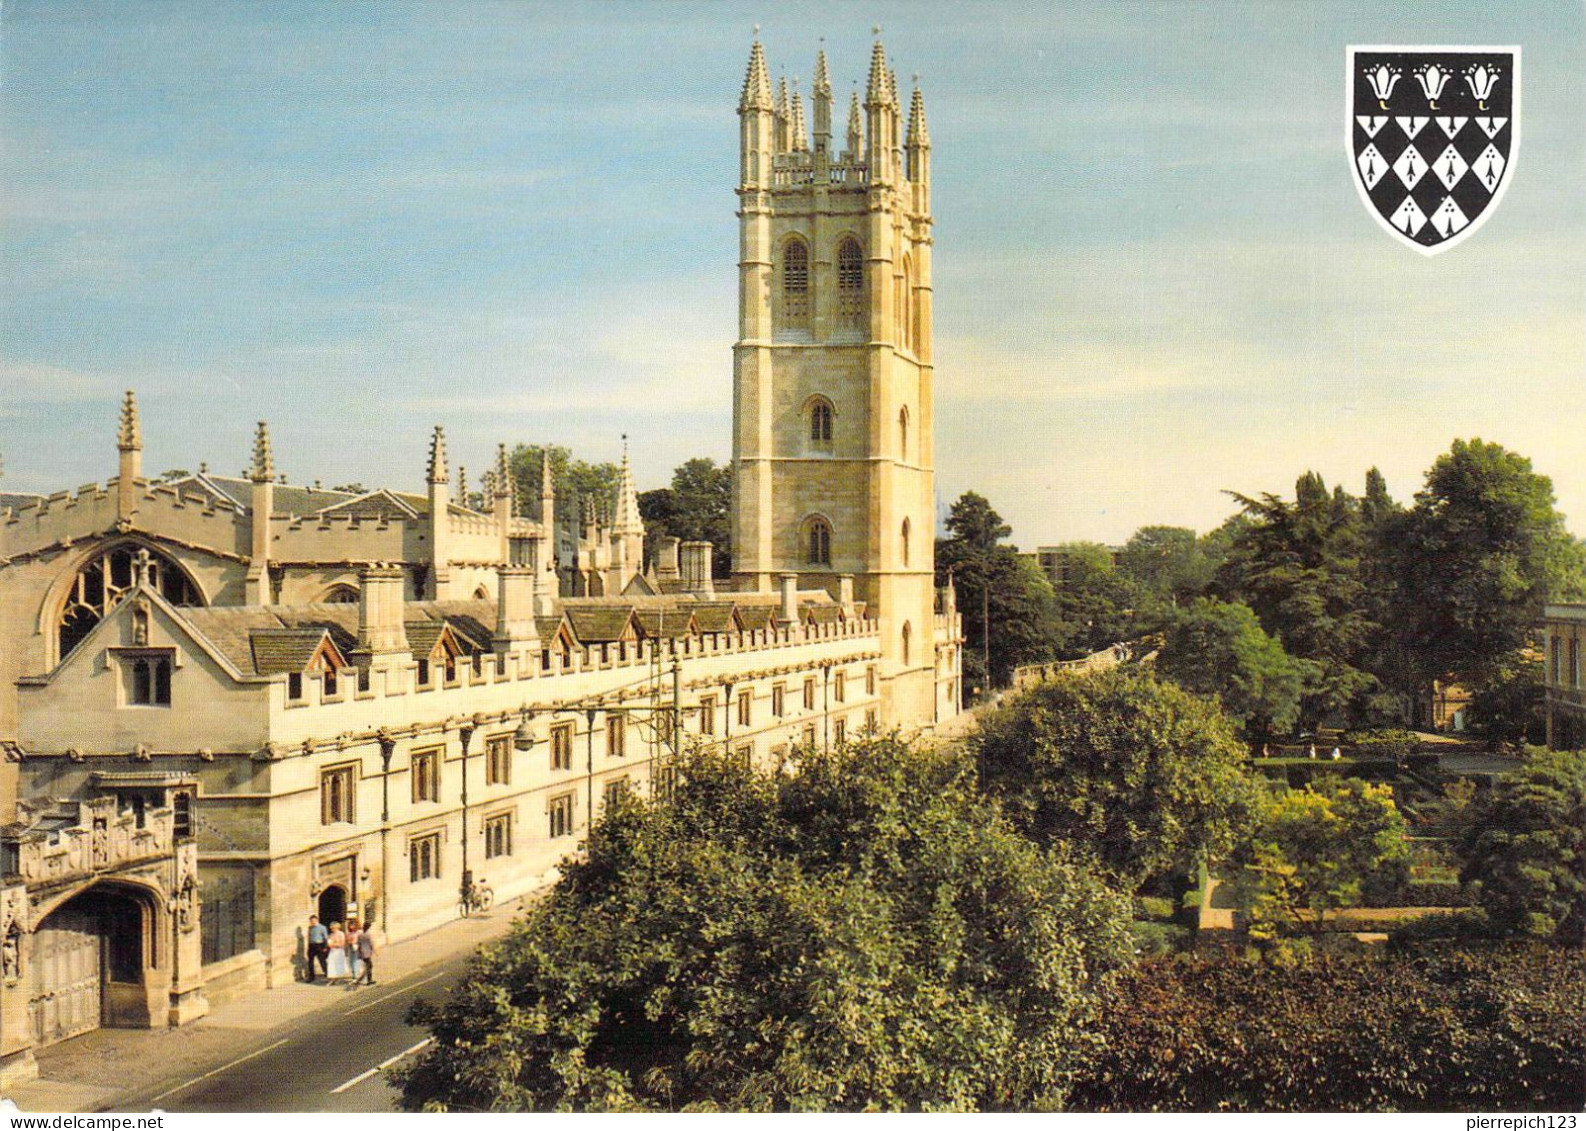 Oxford - Magdalen College - Oxford